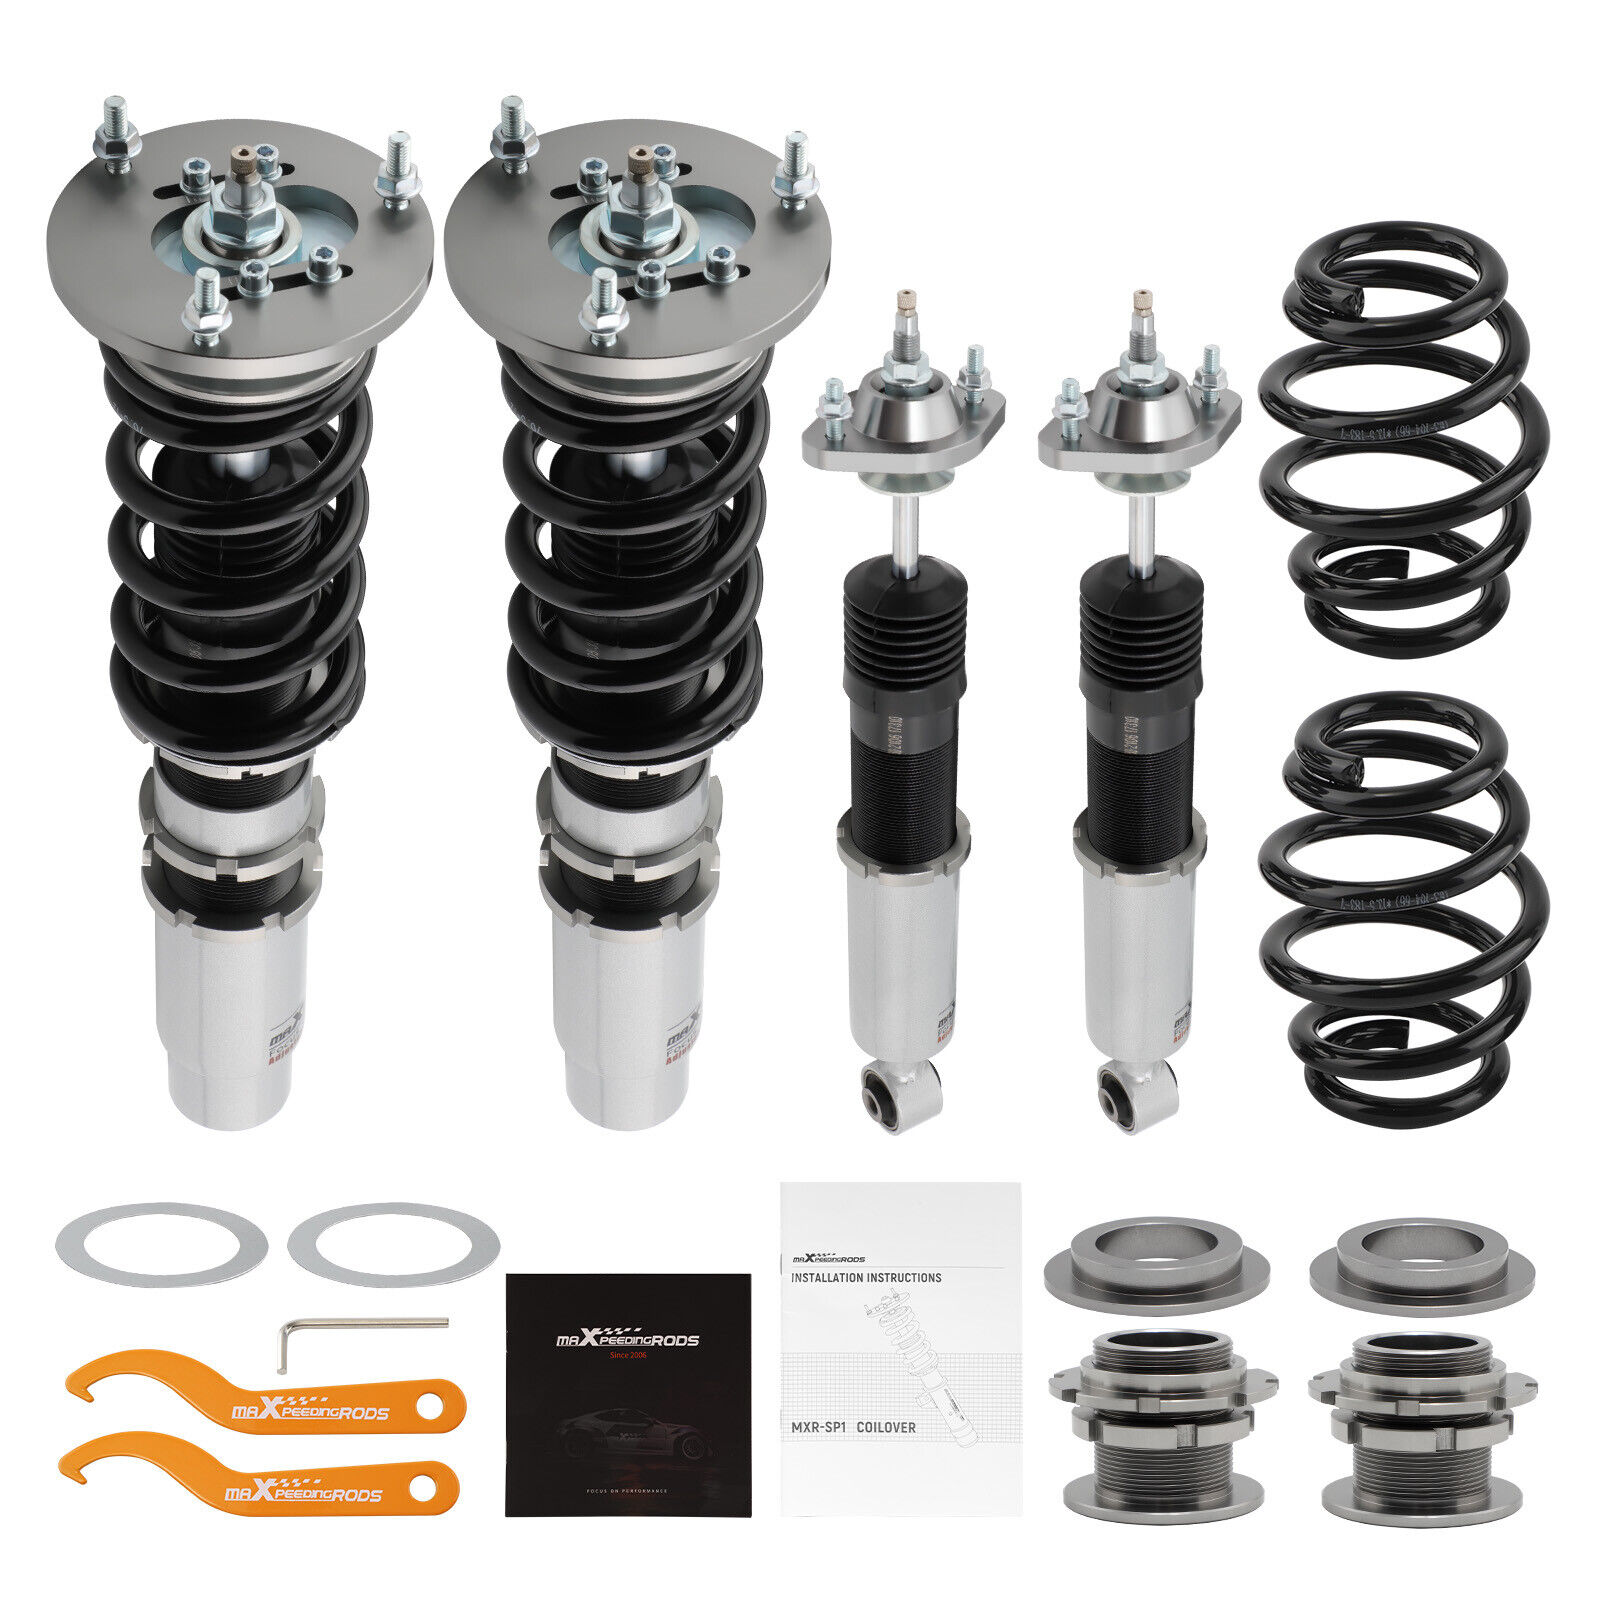 MaXpeedingrods Coilovers 24 Way Adjustable Damper for BMW E46 3 Series 98-05 RWD